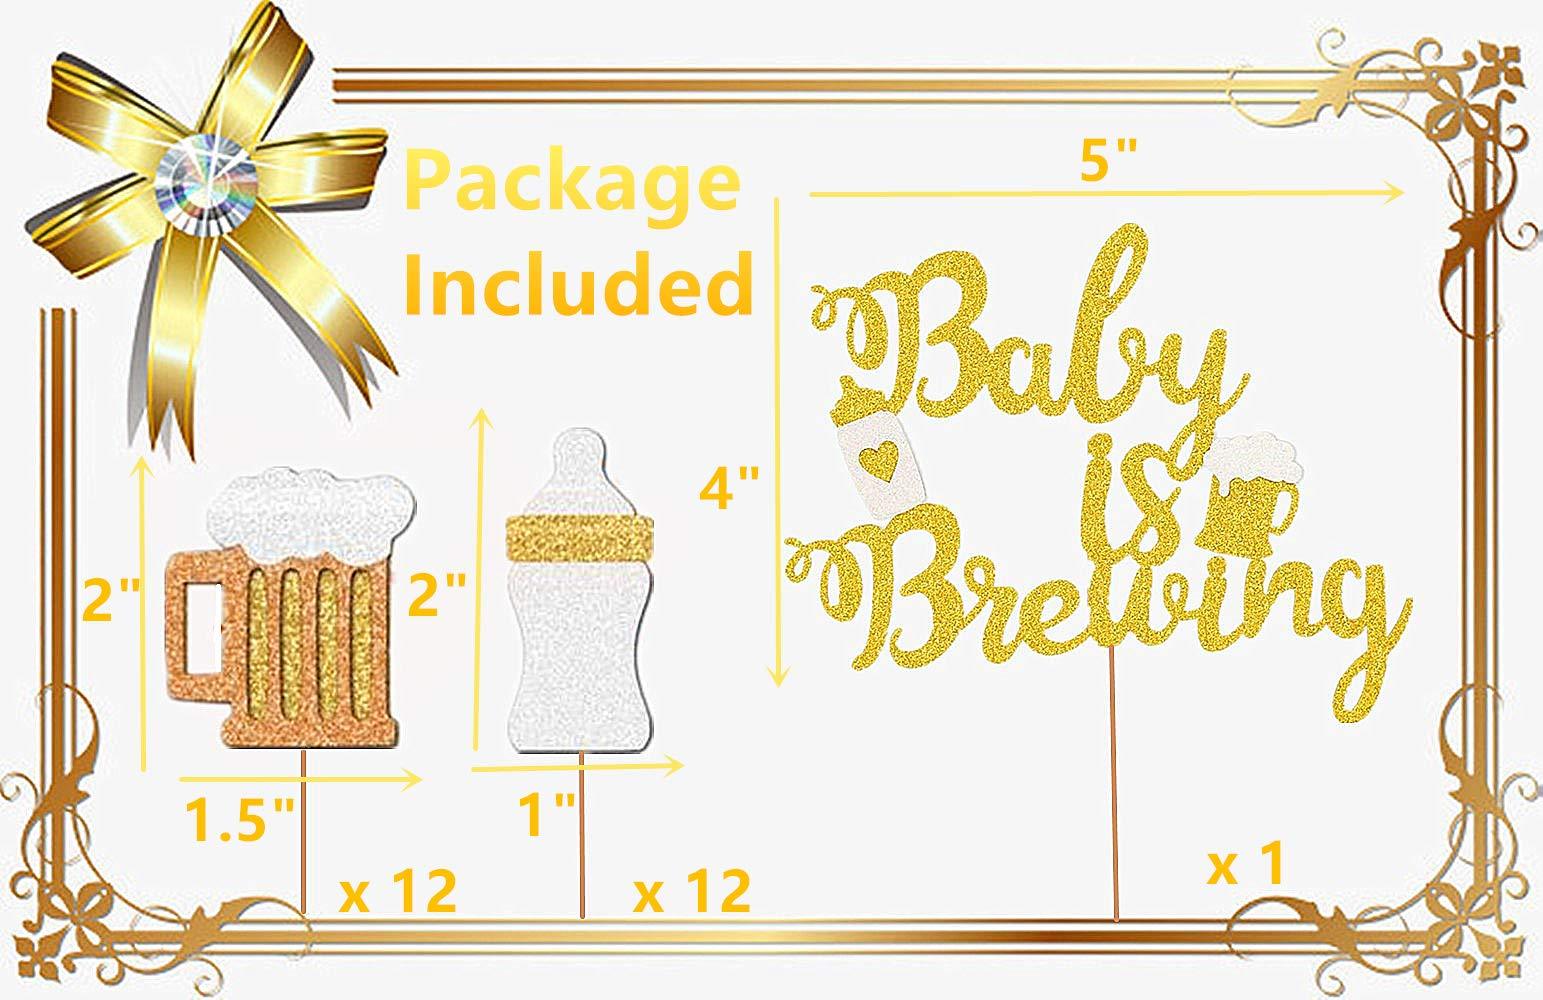 A Baby is Brewing ConfettiTable Decor Party Birthday Beer Mugs Baby Bottles Set of 100 Pieces in Yellow and White Shower